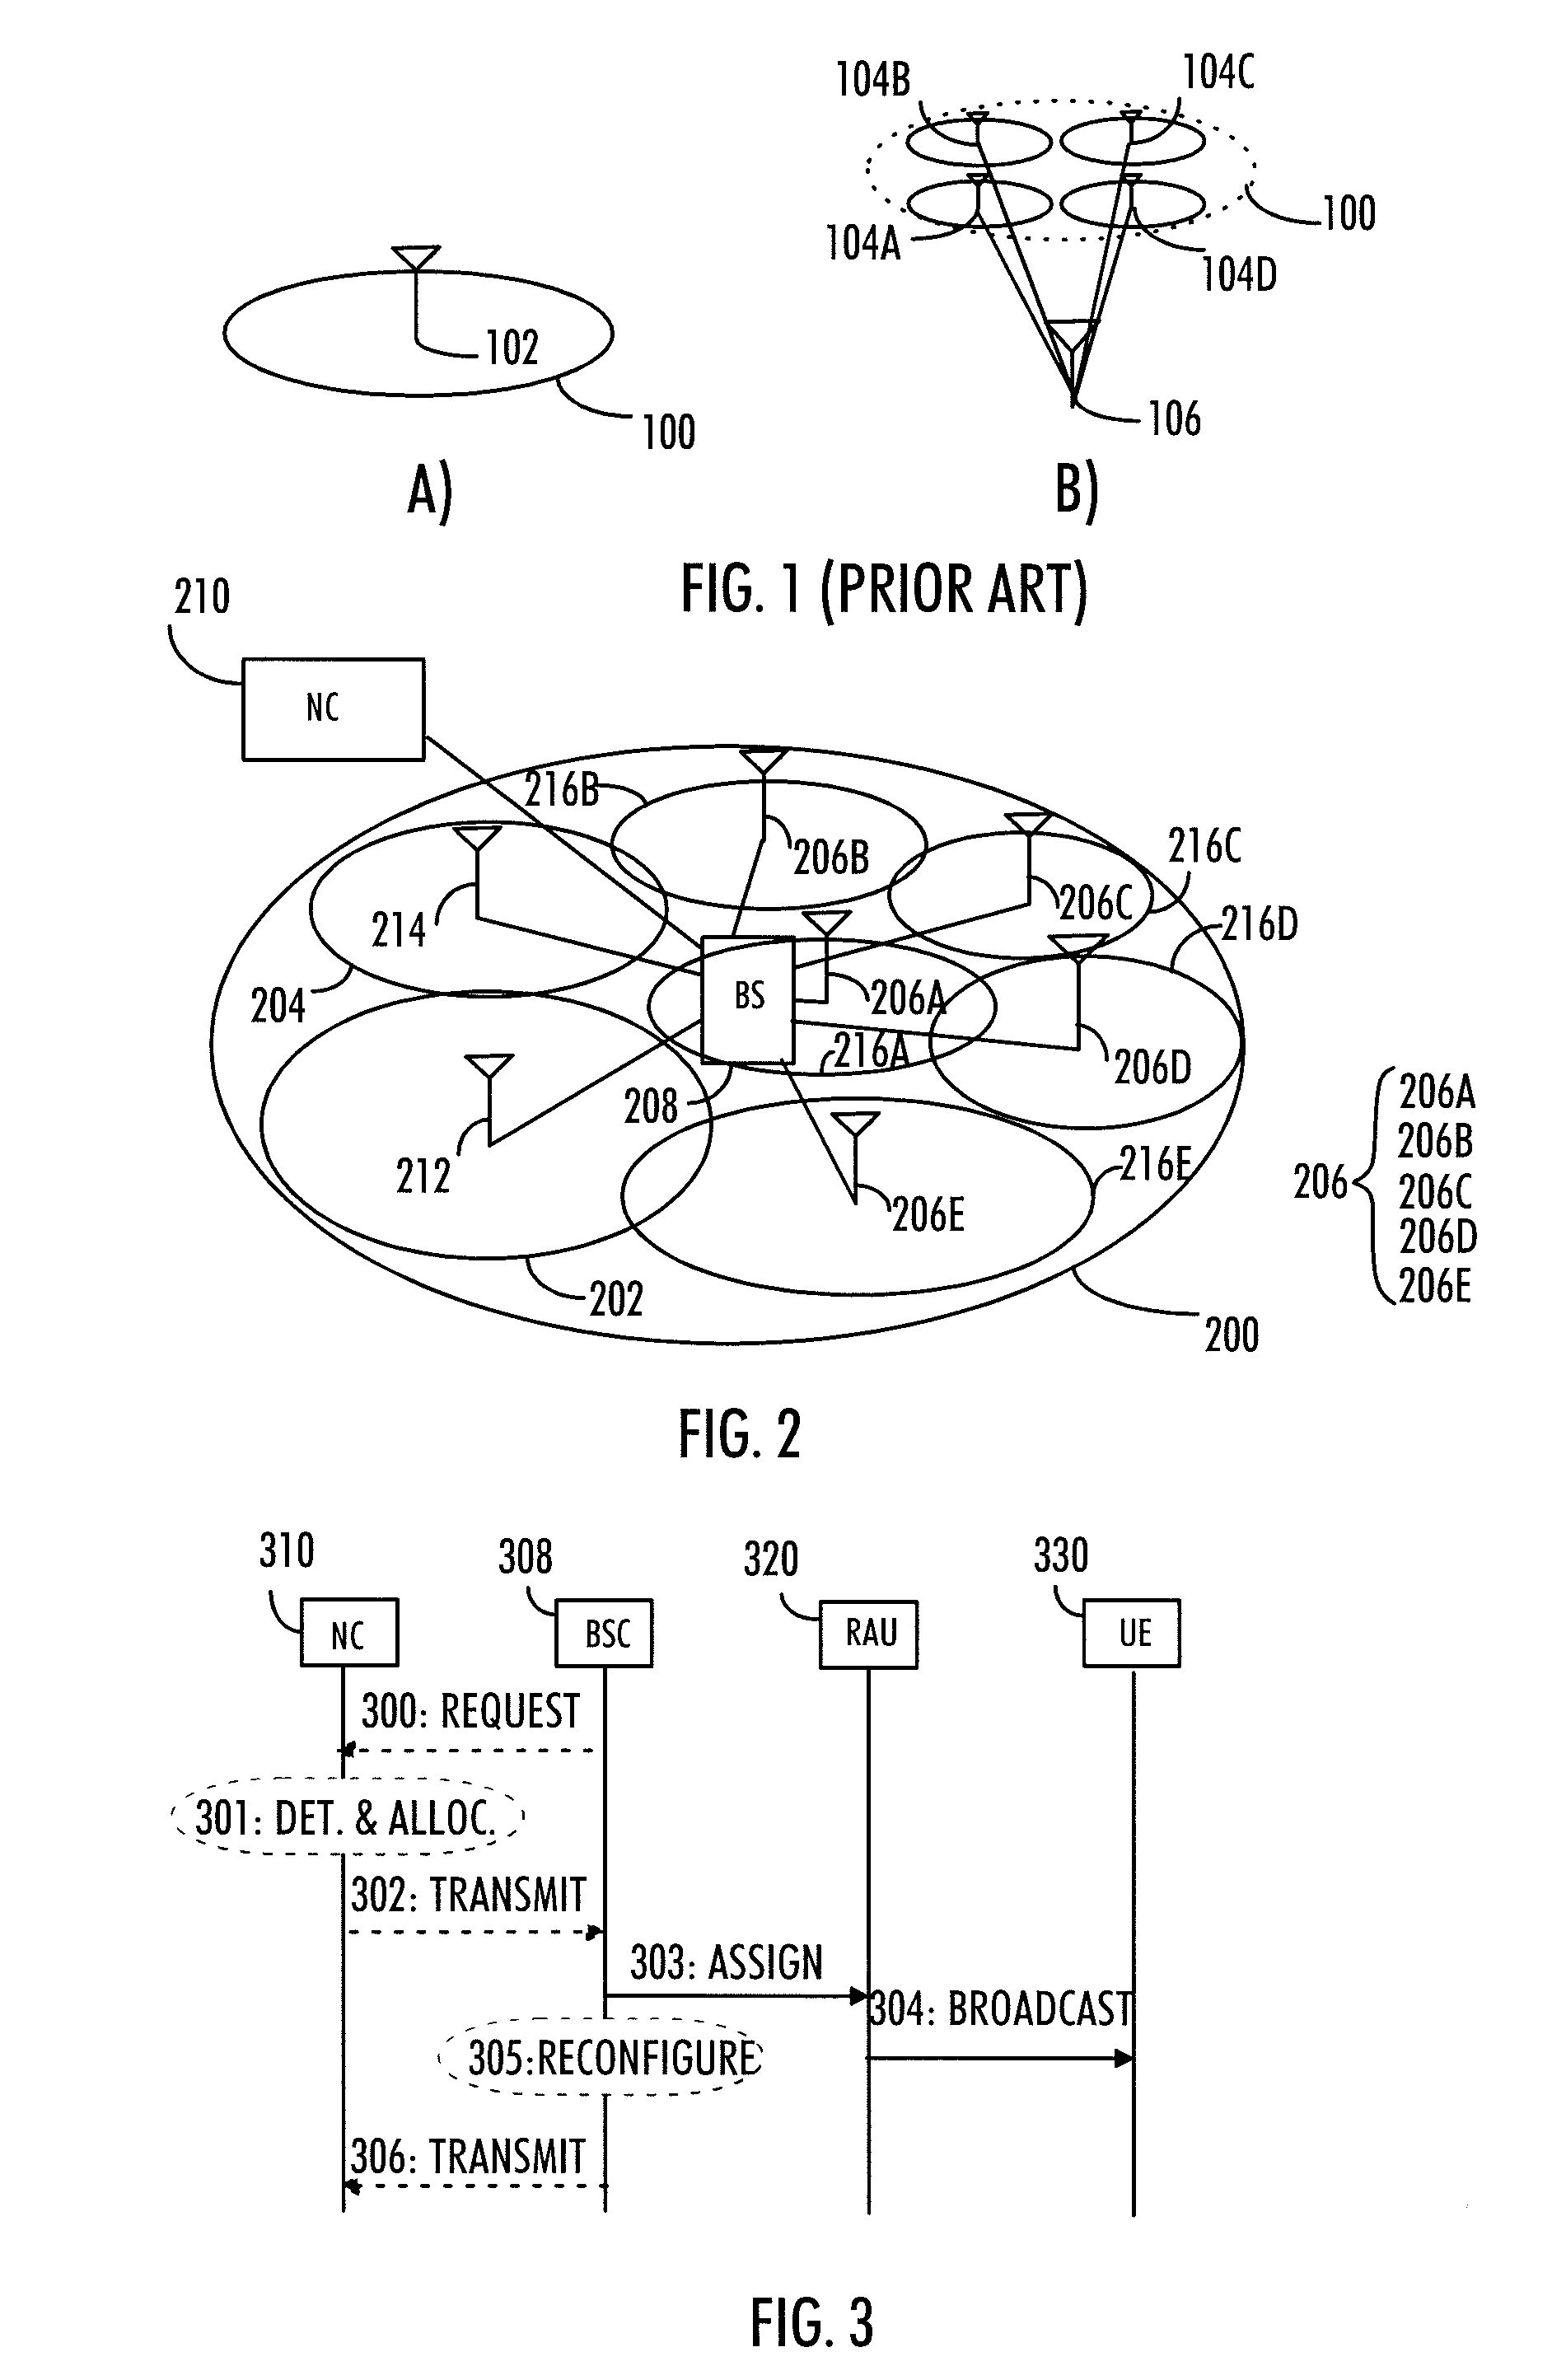 Dynamic cell configuration employing distributed antenna system for advaced cellular networks